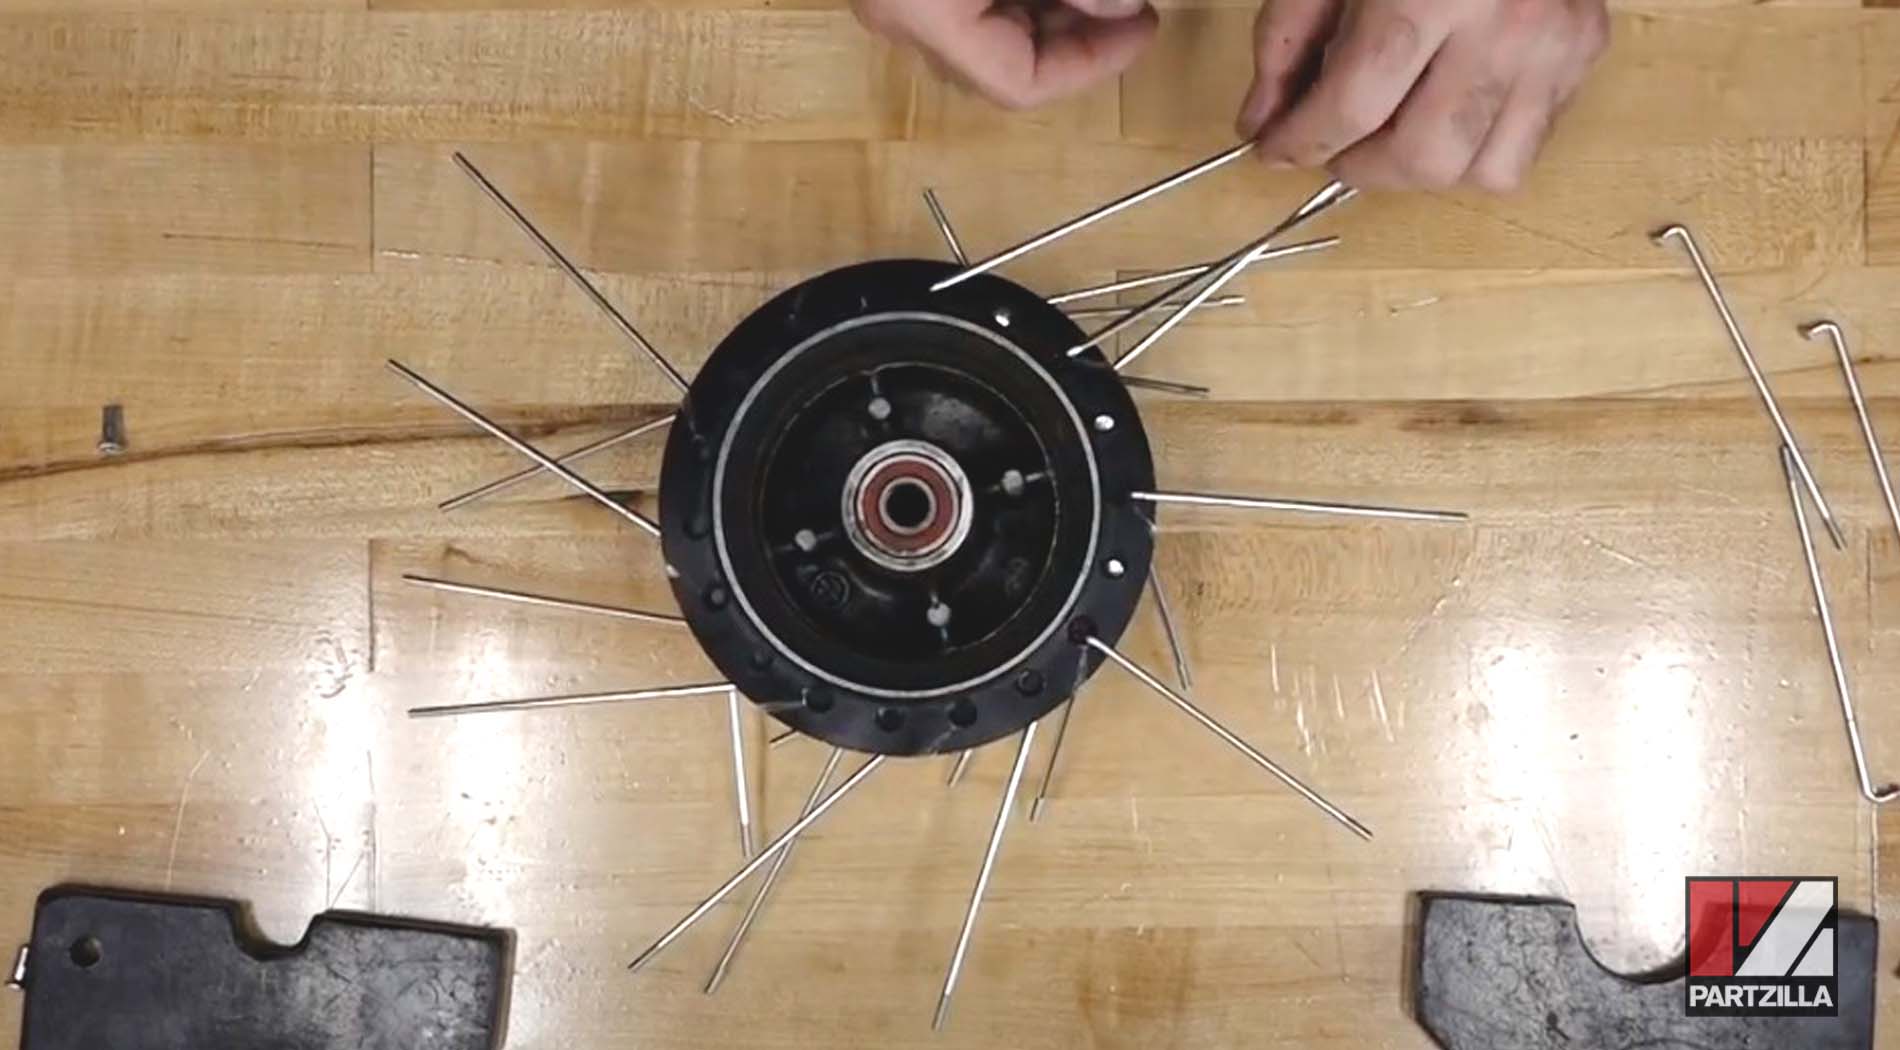 How to lace spokes onto a motorcycle wheel